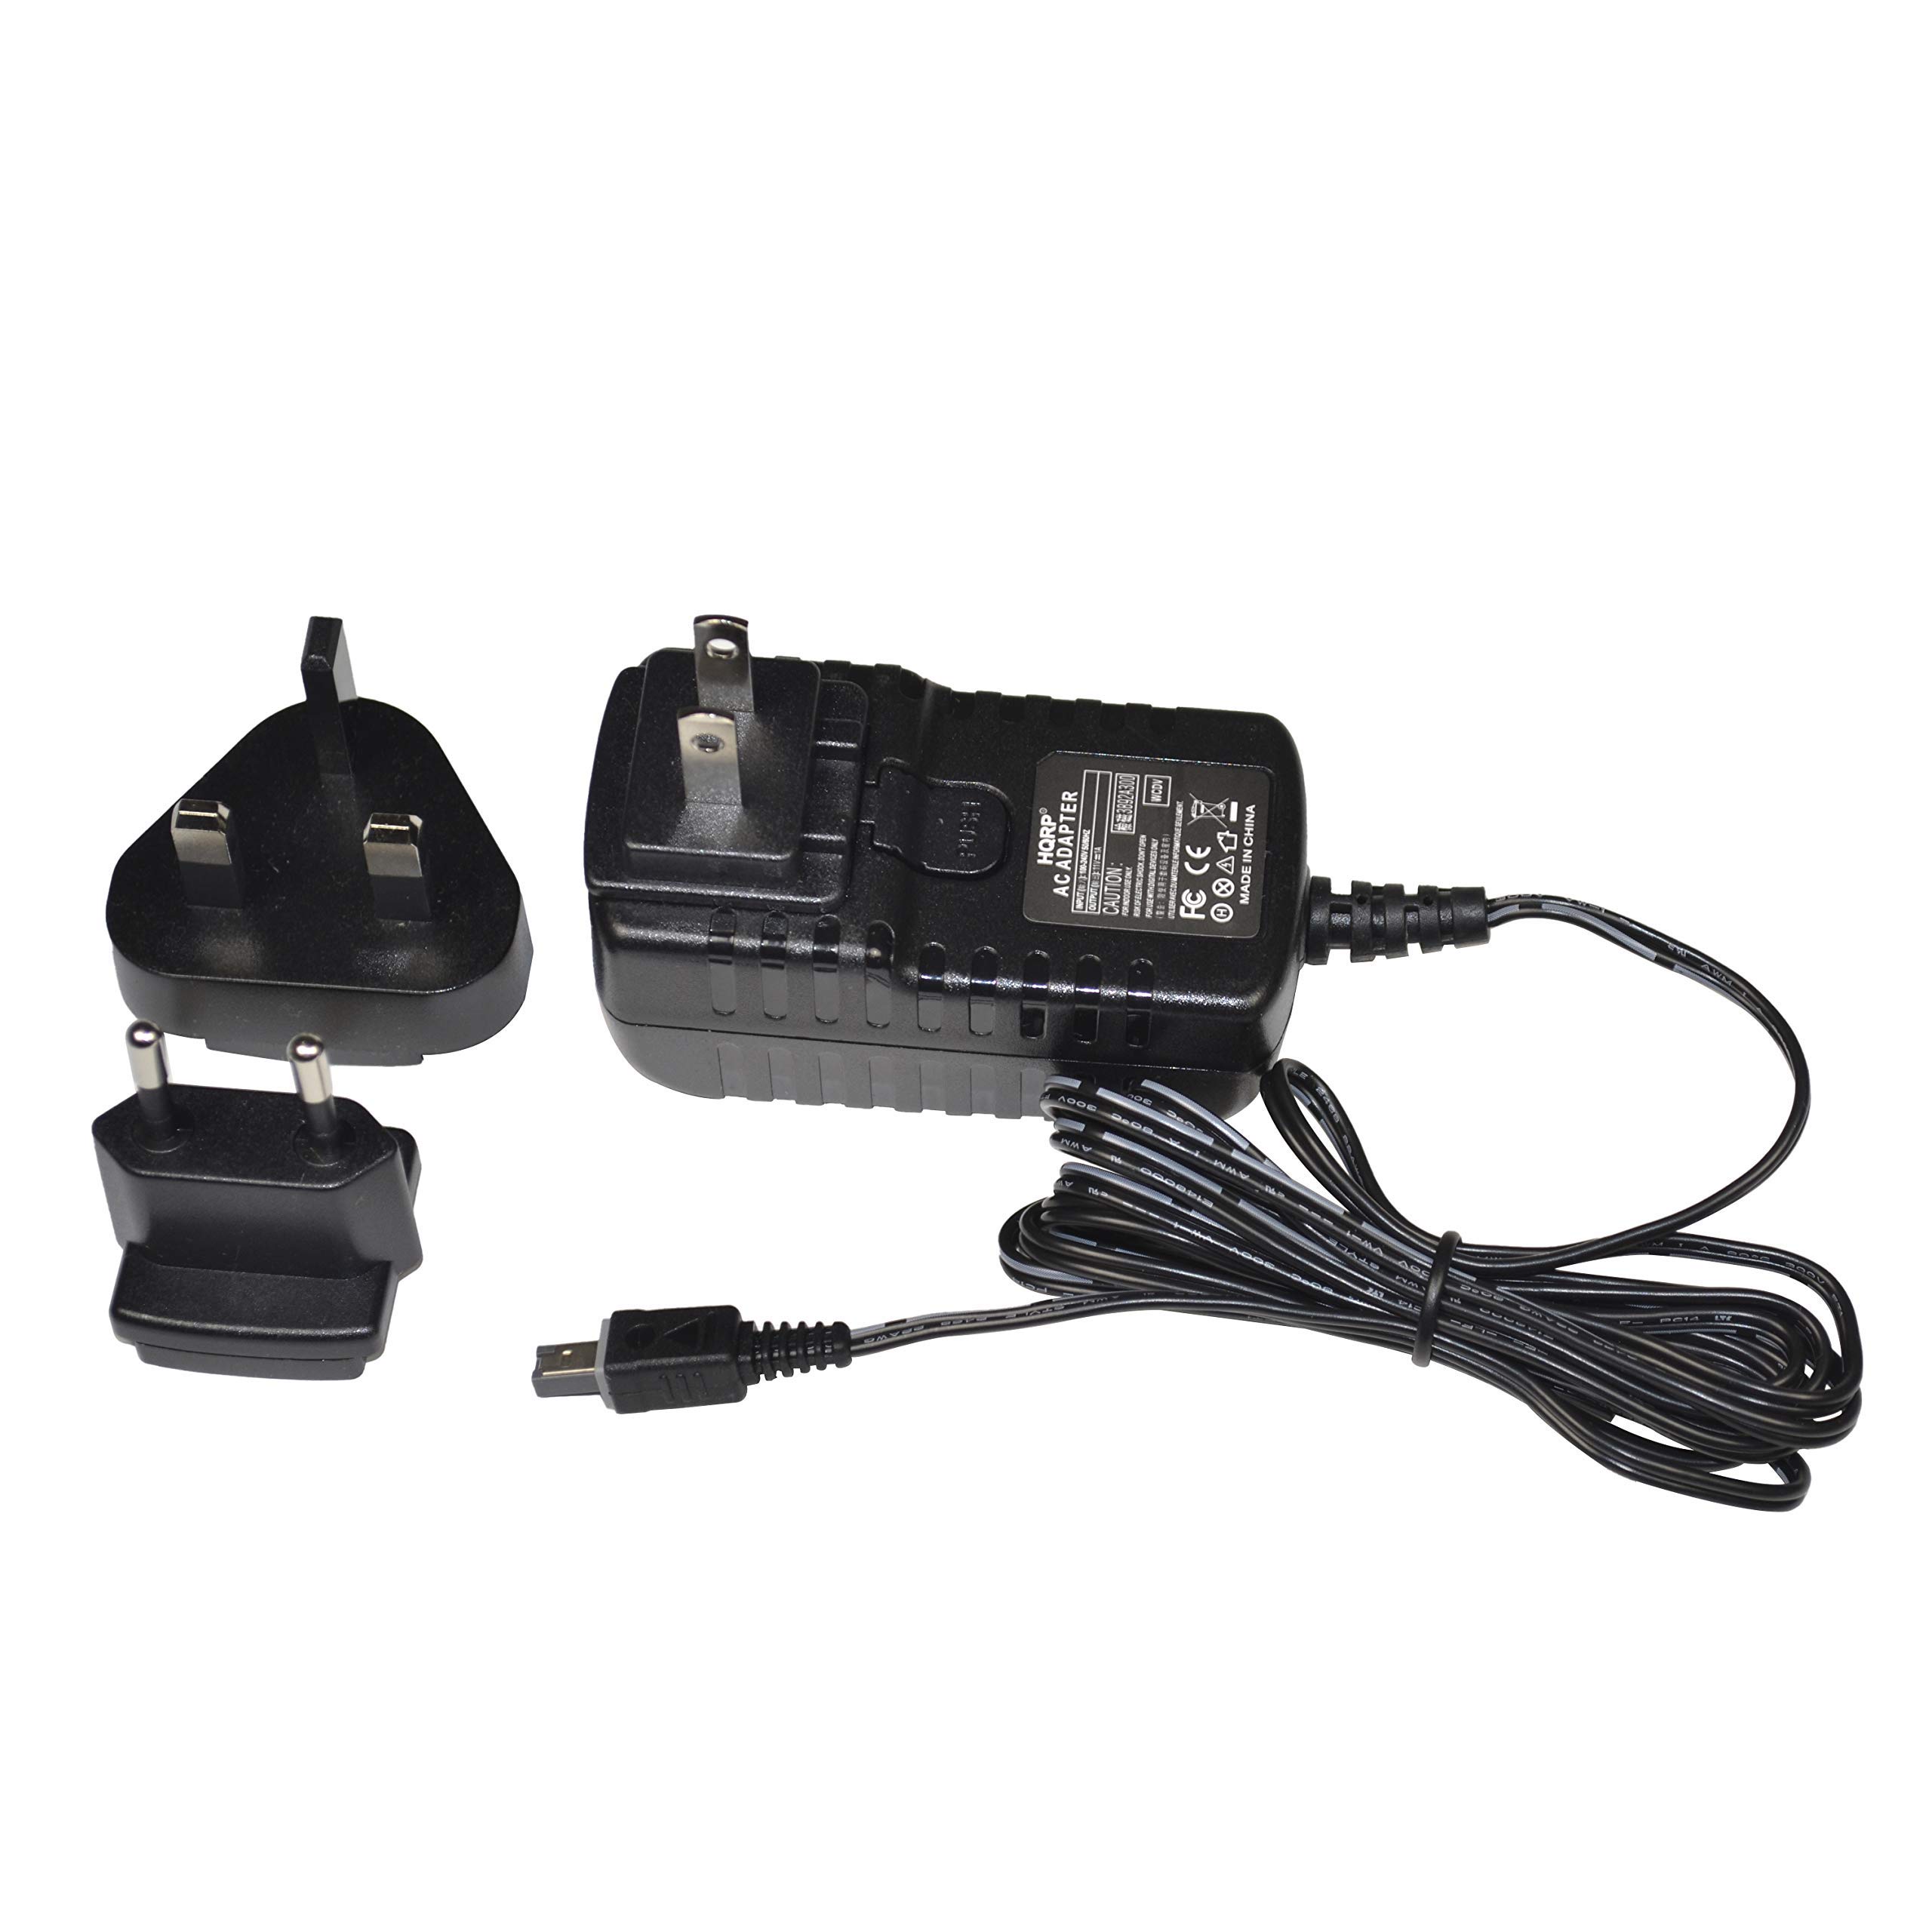 GR-D33 - MiniDV Camcorder With 16x Optical Zoom